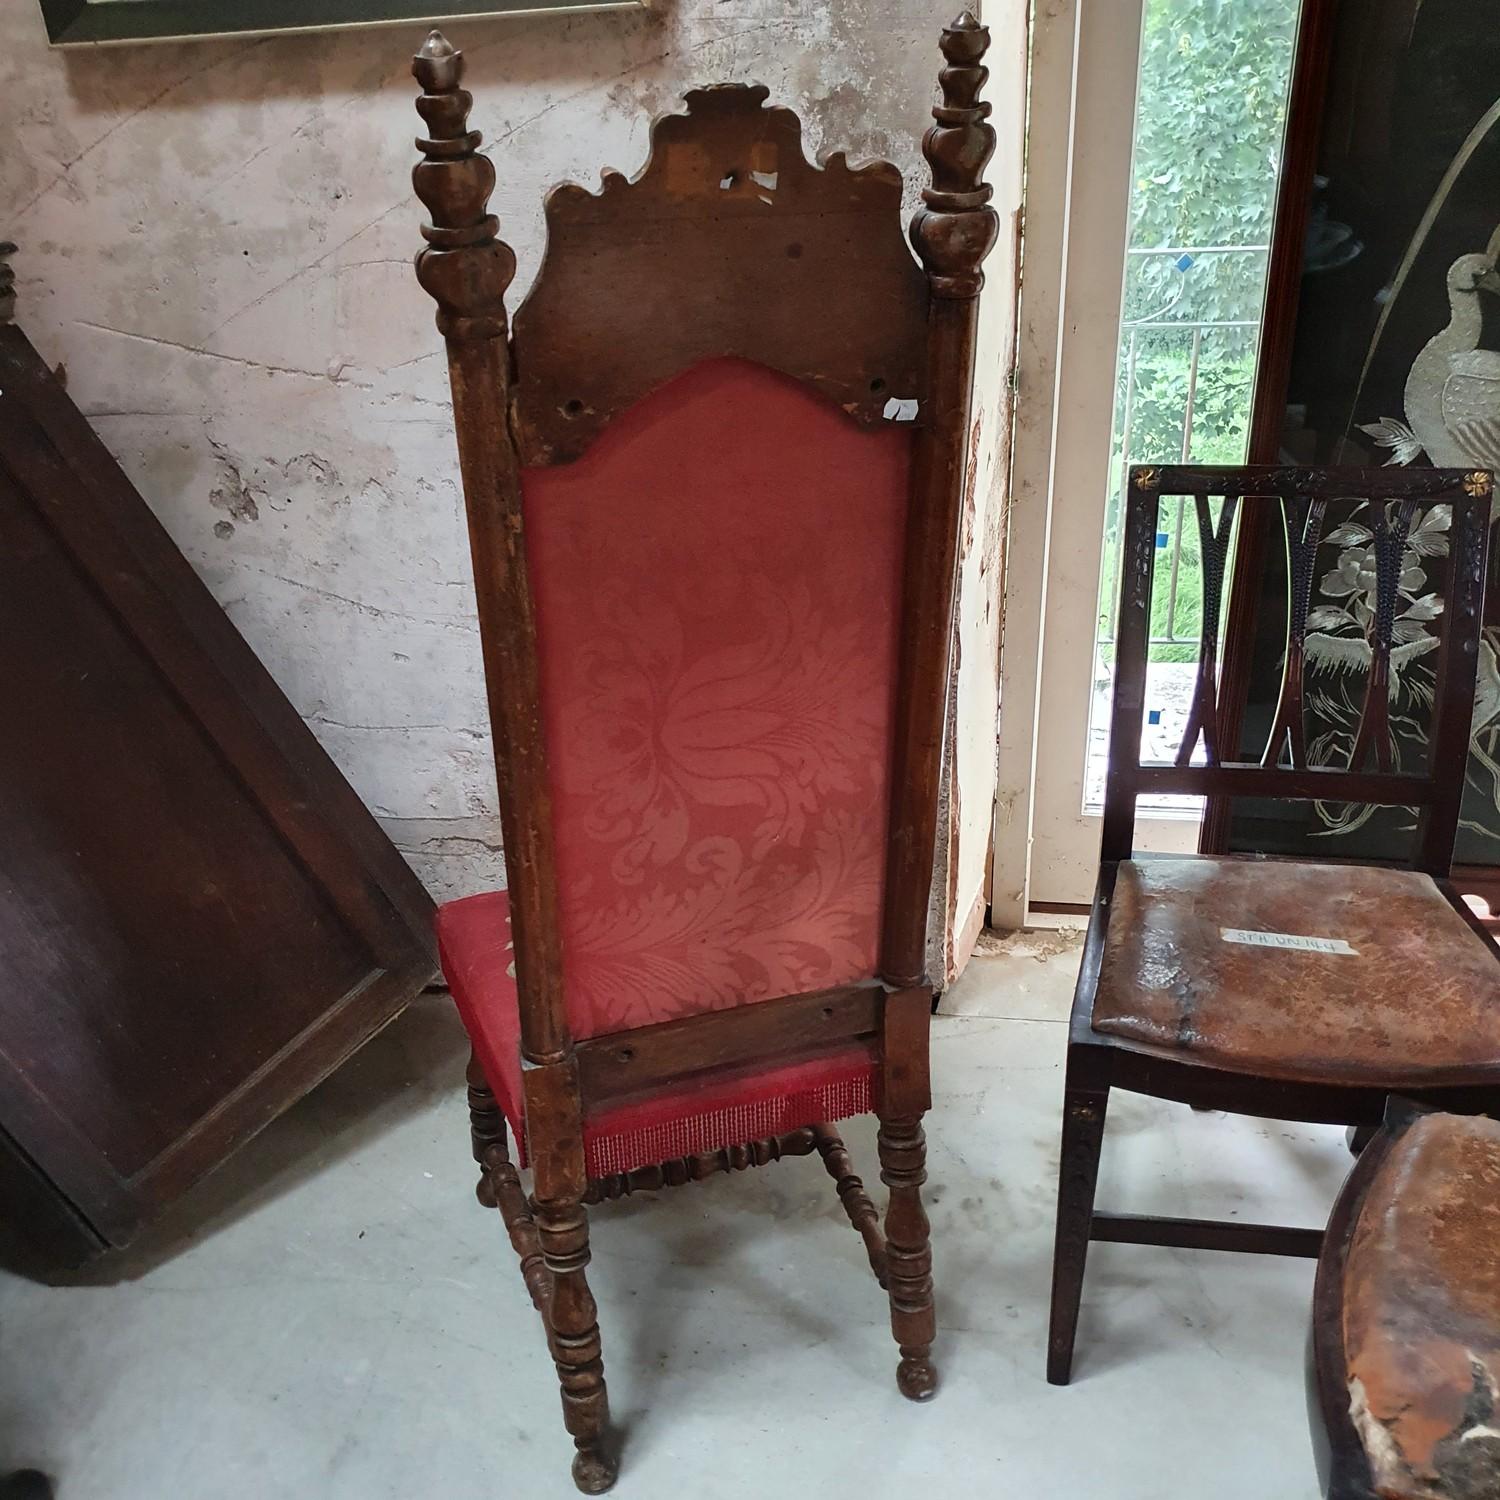 A Victorian Gothic walnut prie dieu chair, with needlework upholstery, wormed, lacks finial - Image 2 of 5